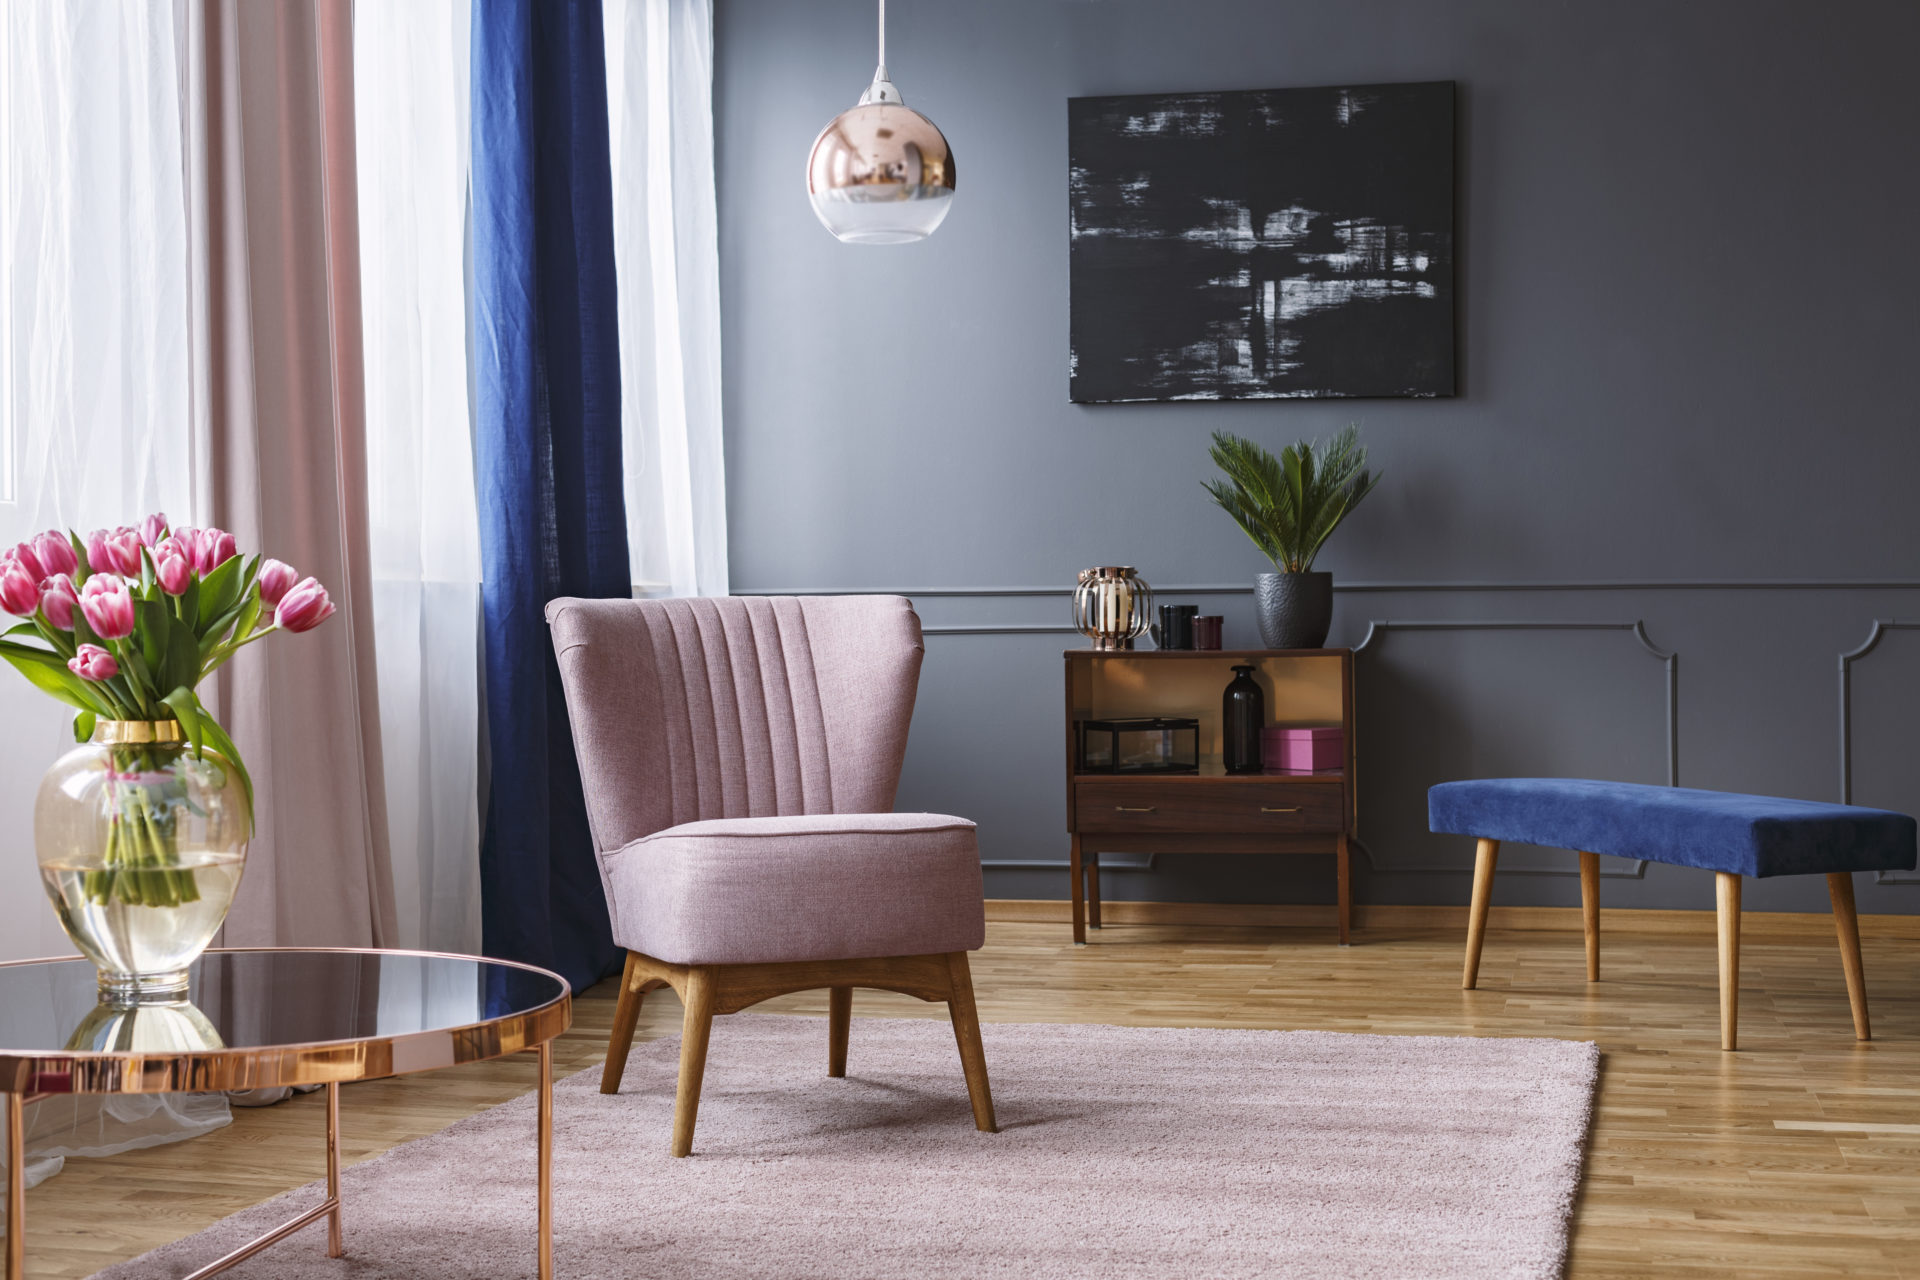 Real Photo Of A Pink Armchair Standing On A Rug And Under A Lamp In Spacious Living Room Interior, Next To A Table With Flowers And In Front Of A Shelf Next To A Grey Wall With Dark Painting